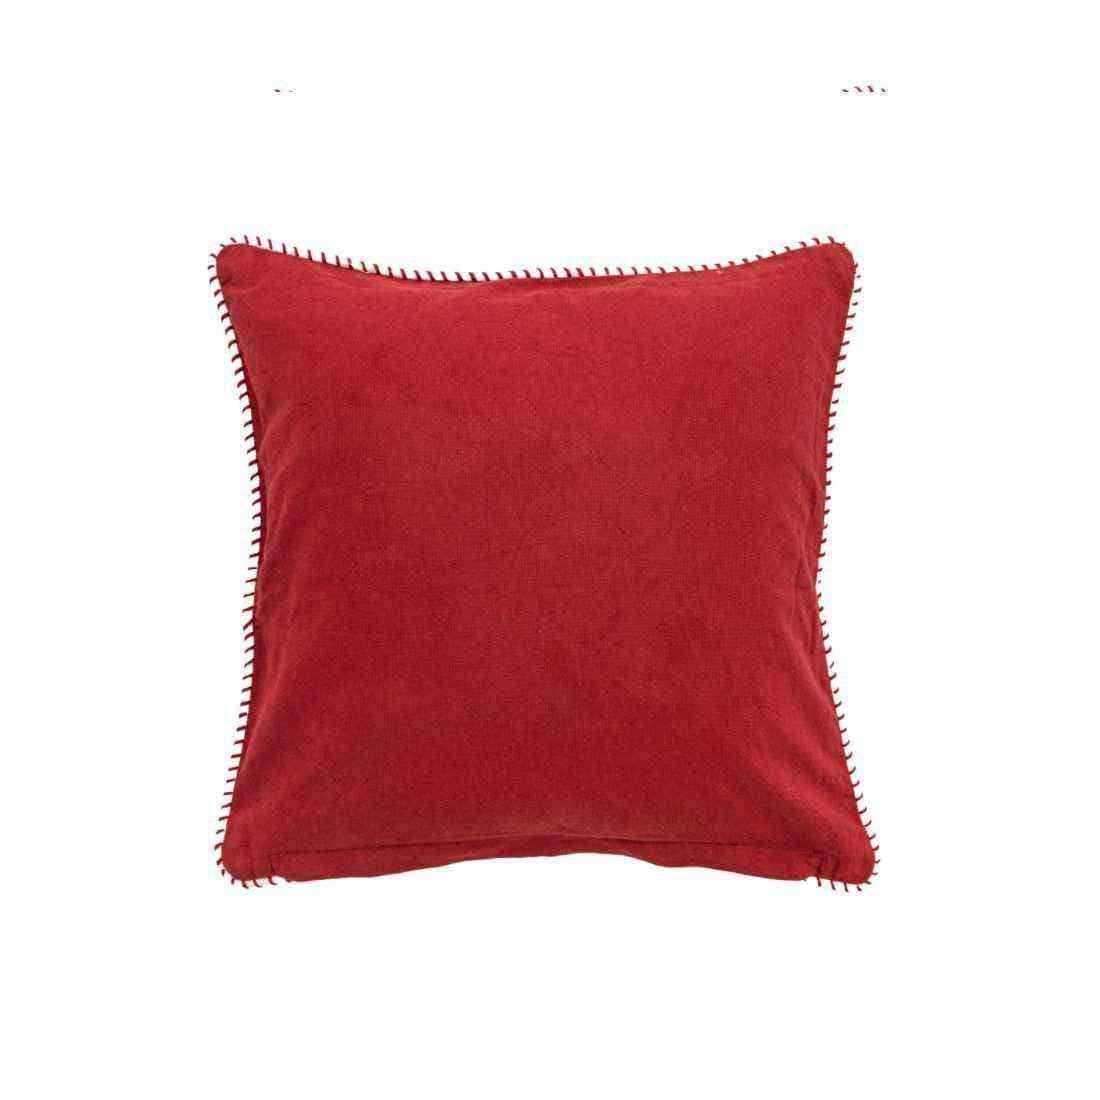 Noel Red Christmas Cushion Cover - The Farthing